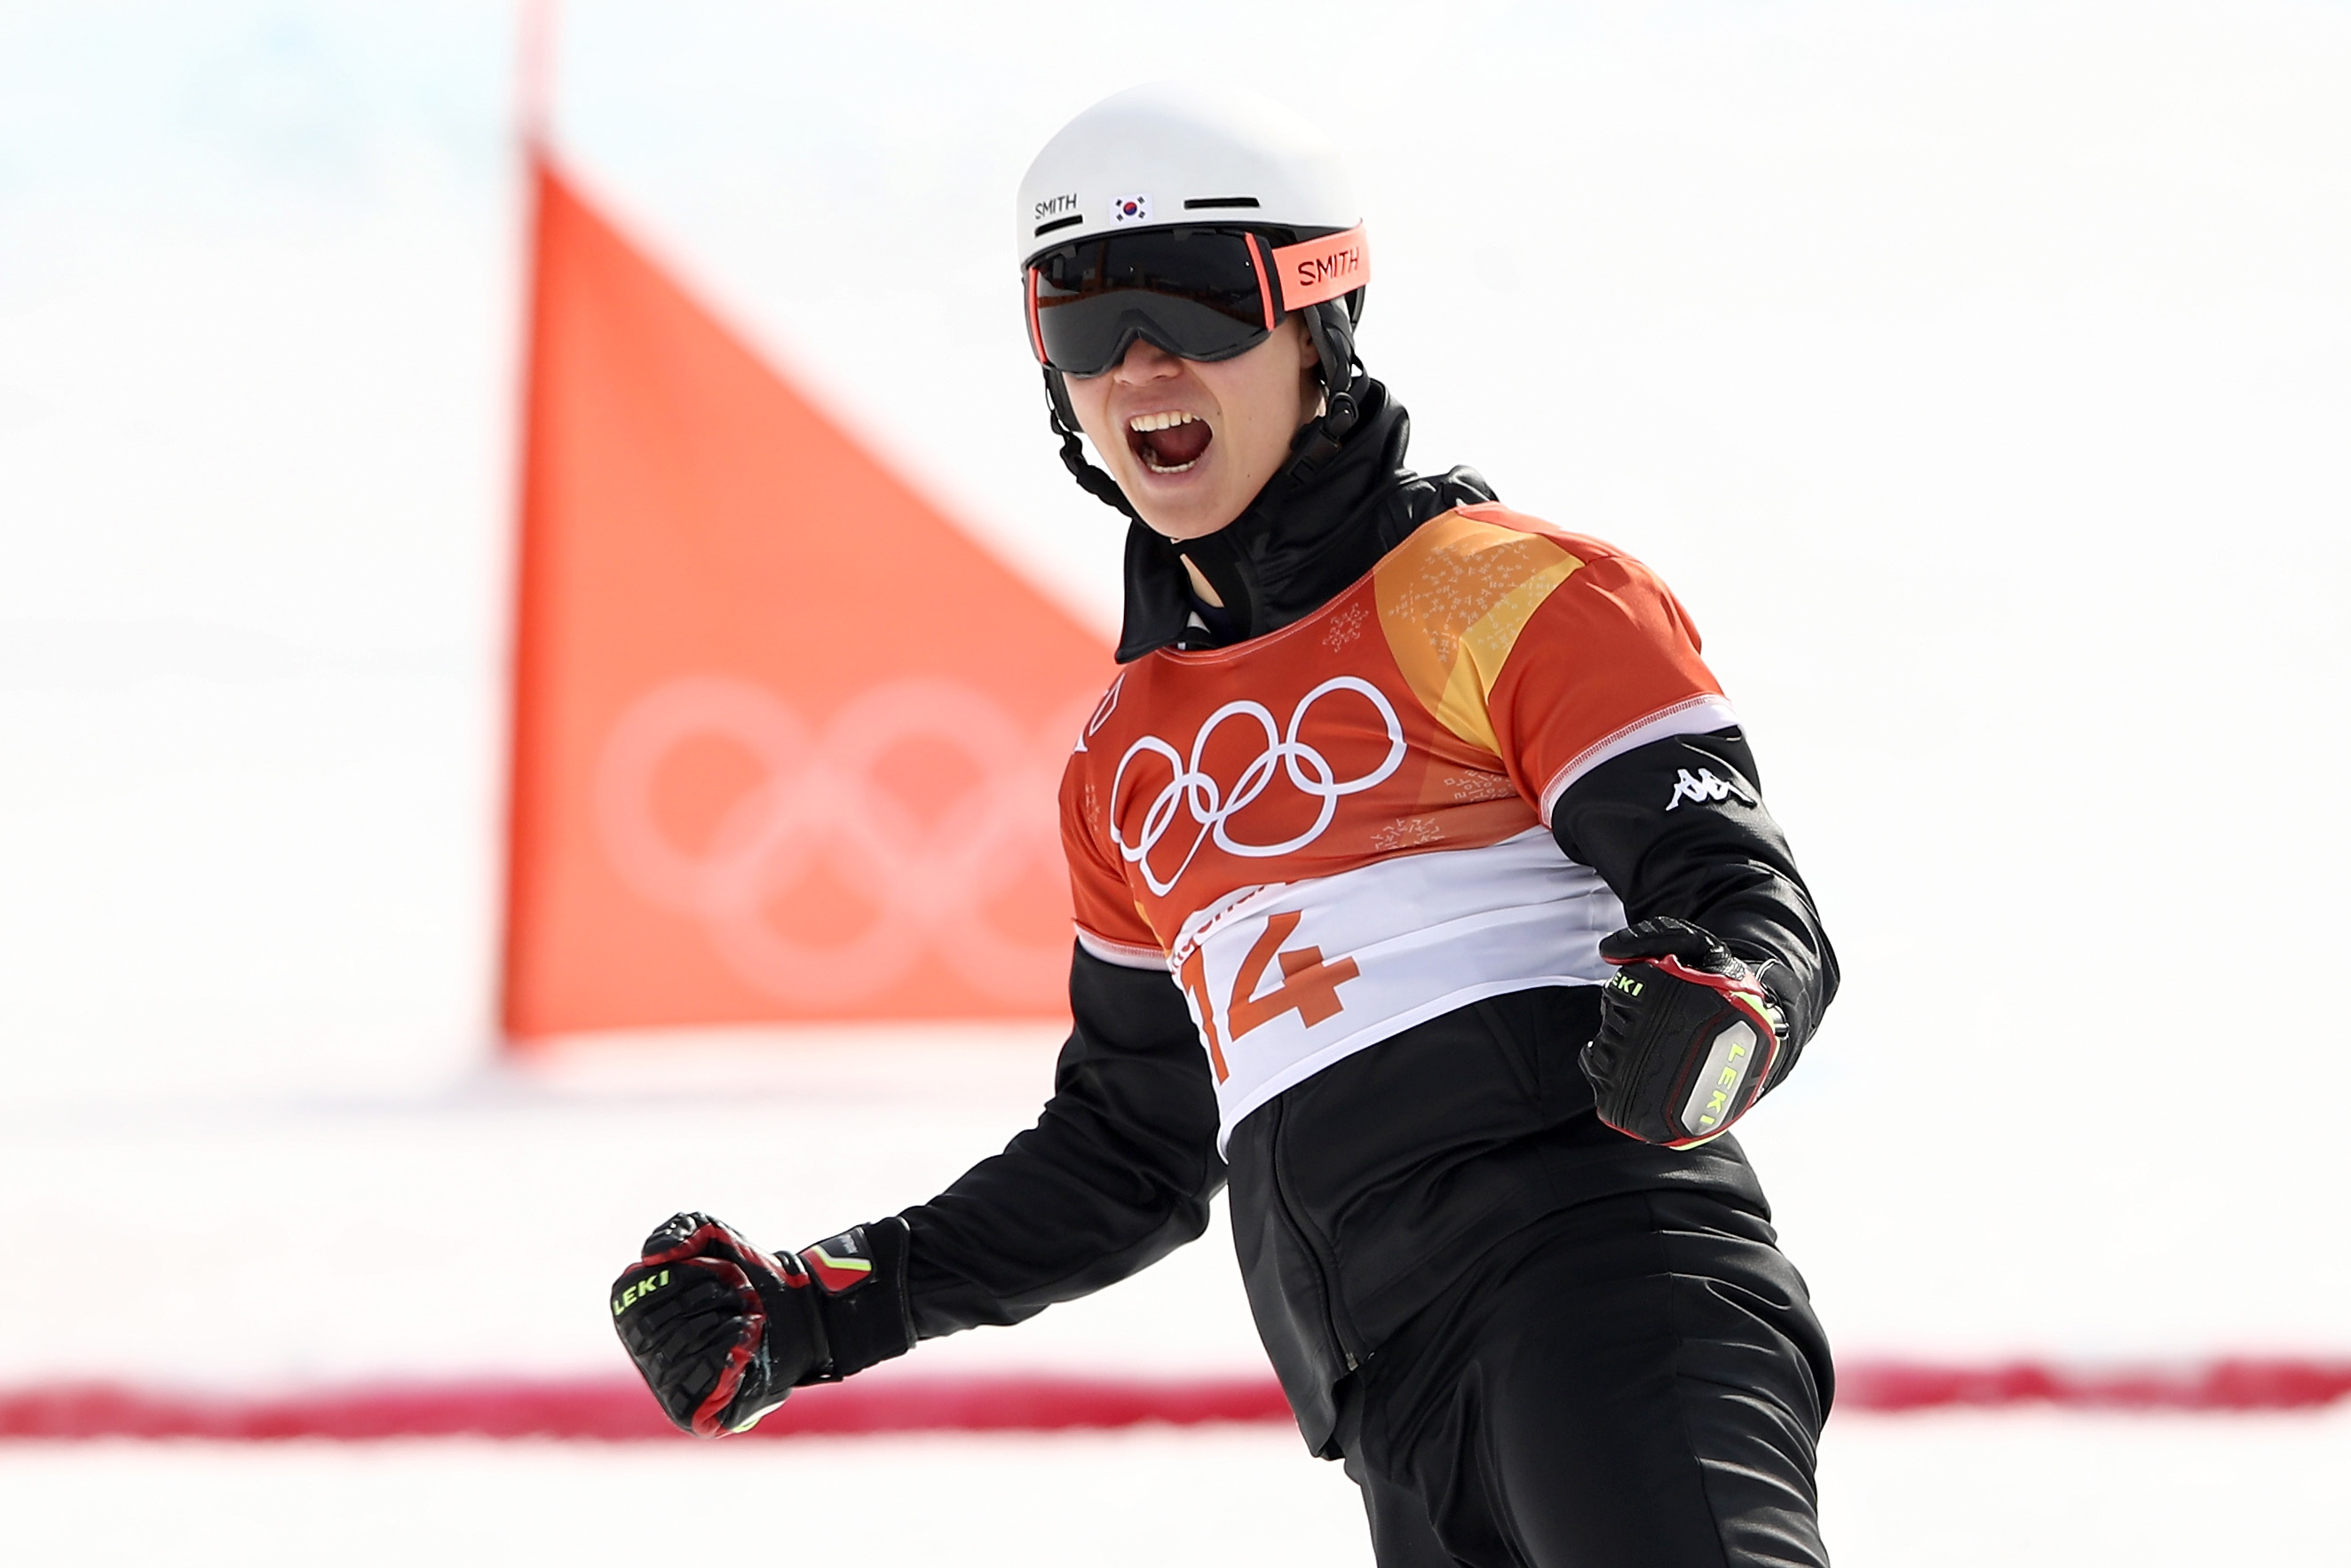 PYEONGCHANG-GUN, SOUTH KOREA - FEBRUARY 24:  Sang-ho Lee of Korea celebrates during the Men's Snowboard Parallel Giant Slalom Quarterfinal on day fifteen of the PyeongChang 2018 Winter Olympic Games at Phoenix Snow Park on February 24, 2018 in Pyeongchang-gun, South Korea.  (Photo by Cameron Spencer/Getty Images)